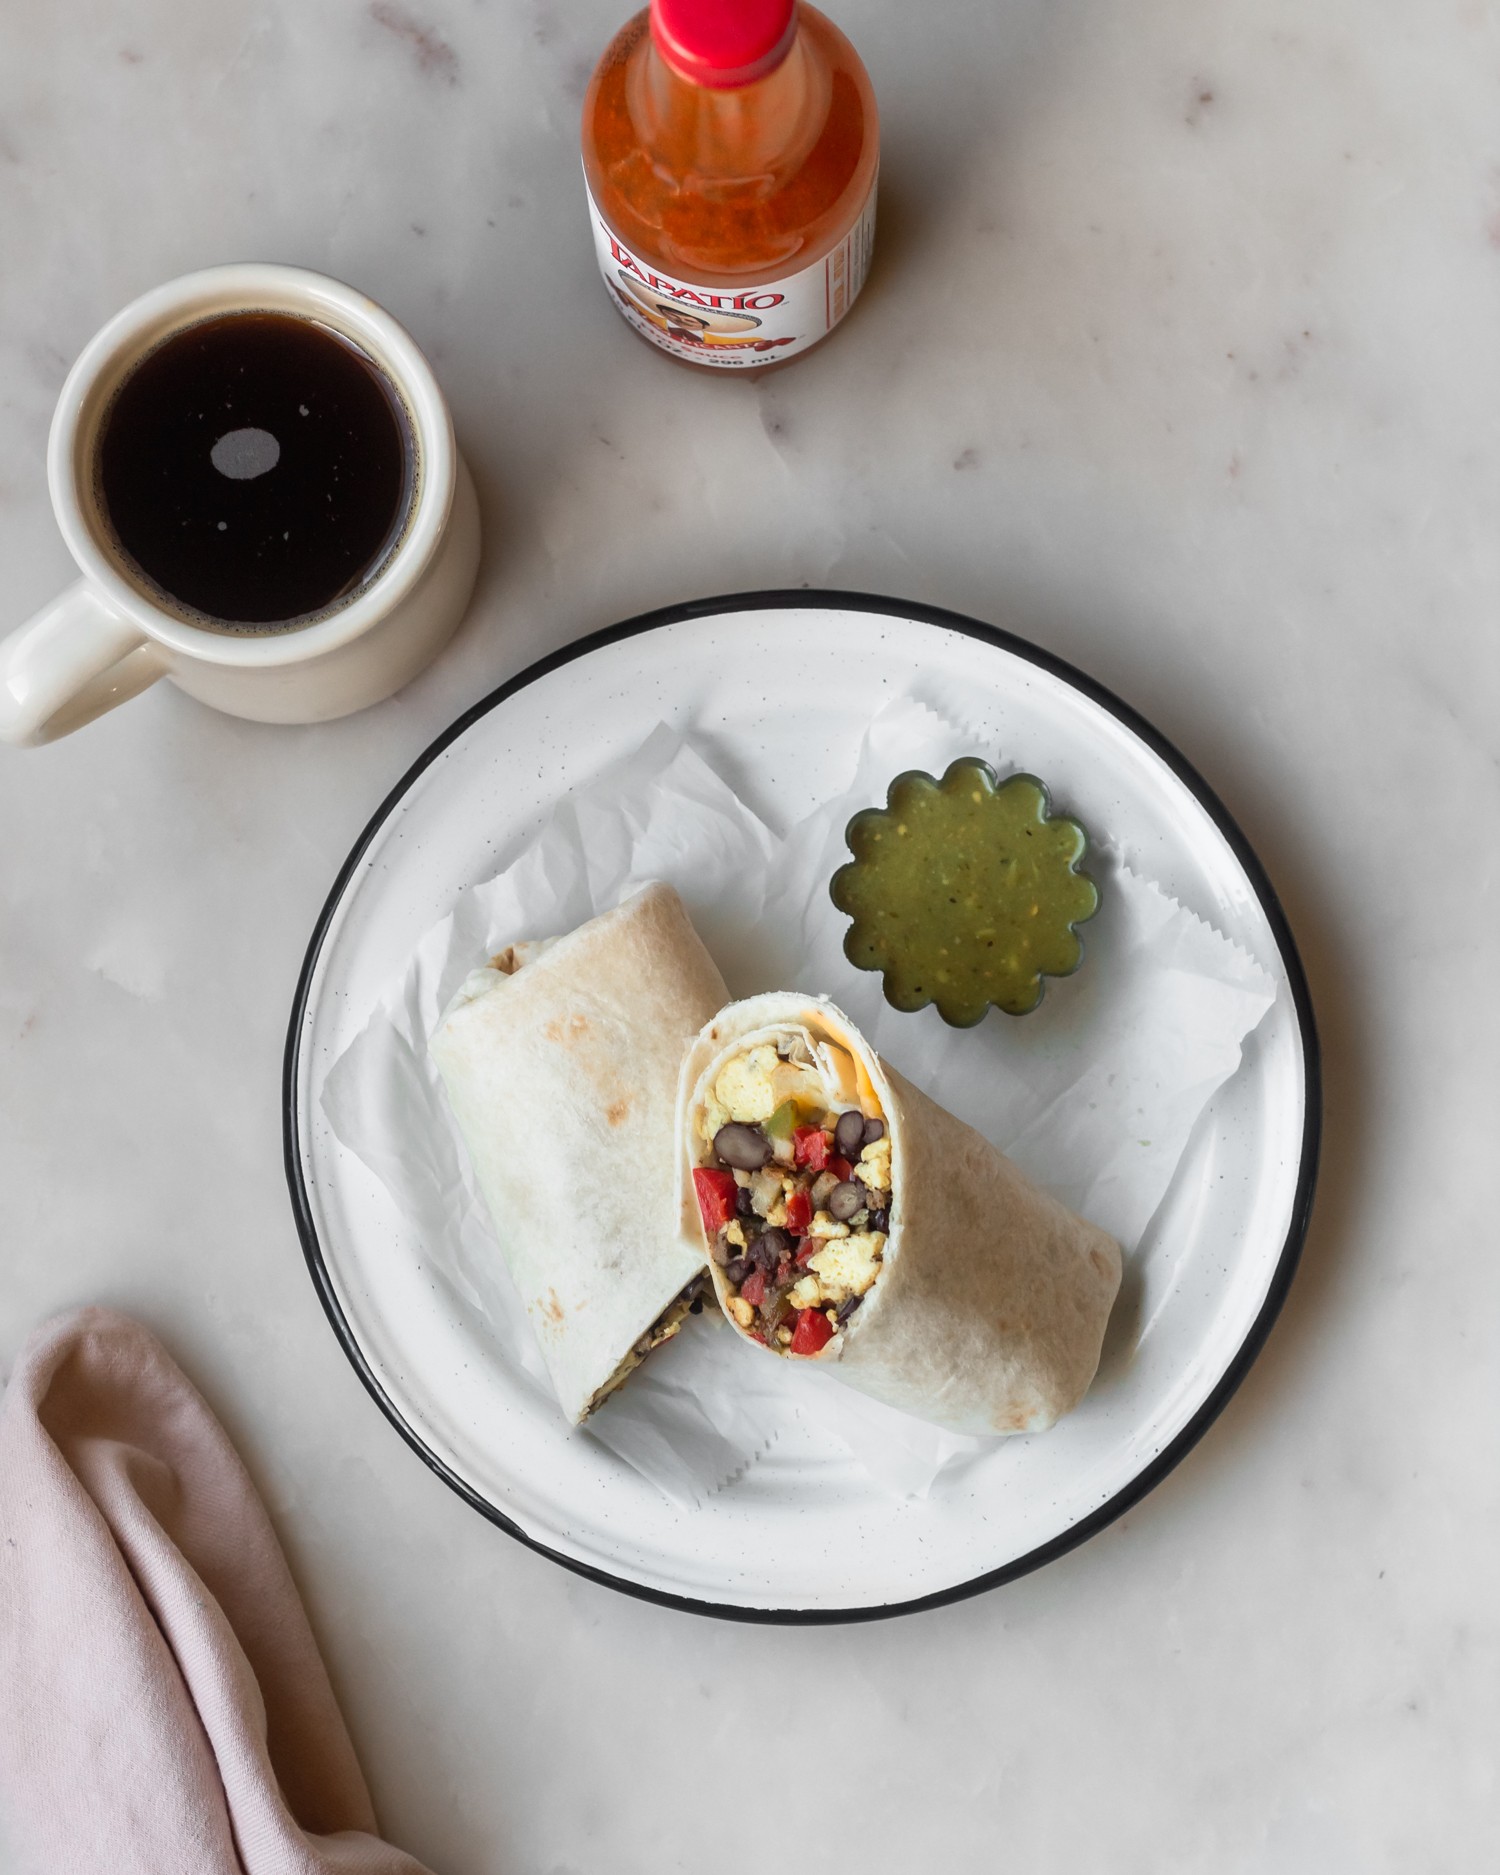 A white plate with a breakfast burrito on a white counter, surrounded by a cup of coffee, hot sauce, and a pink linen.